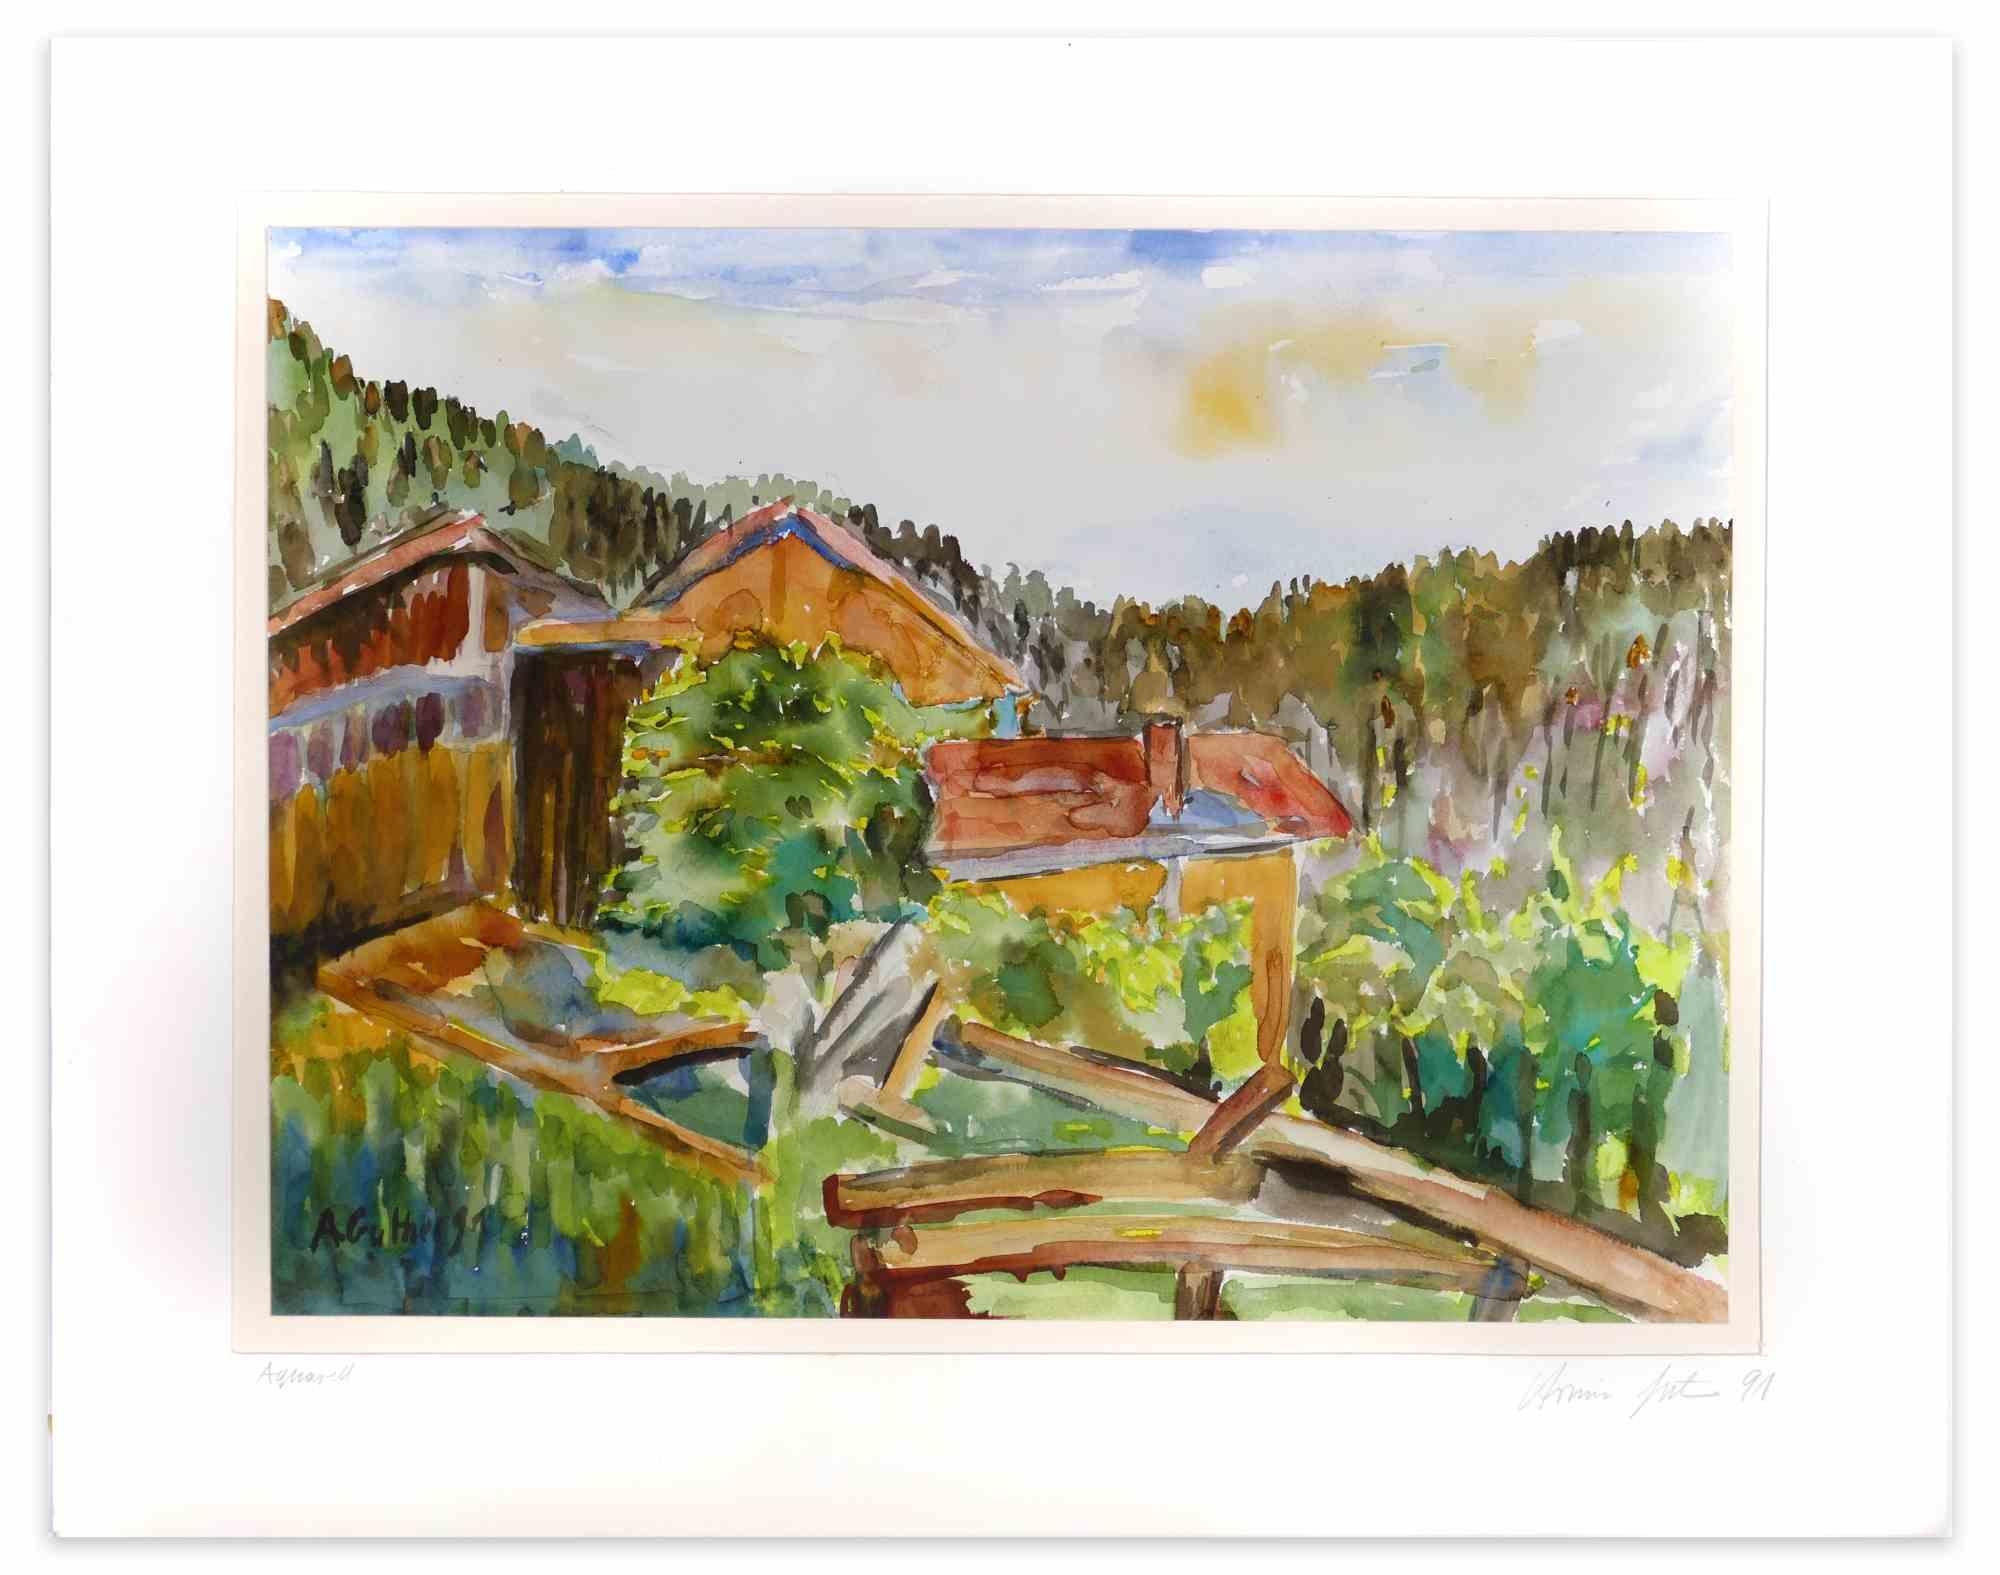 Landscape is an original drawing in watercolor realize by Armin Guther in 1991.

Hand signed.

Good conditions.

The artwork is represented through soft pencil strokes.

 